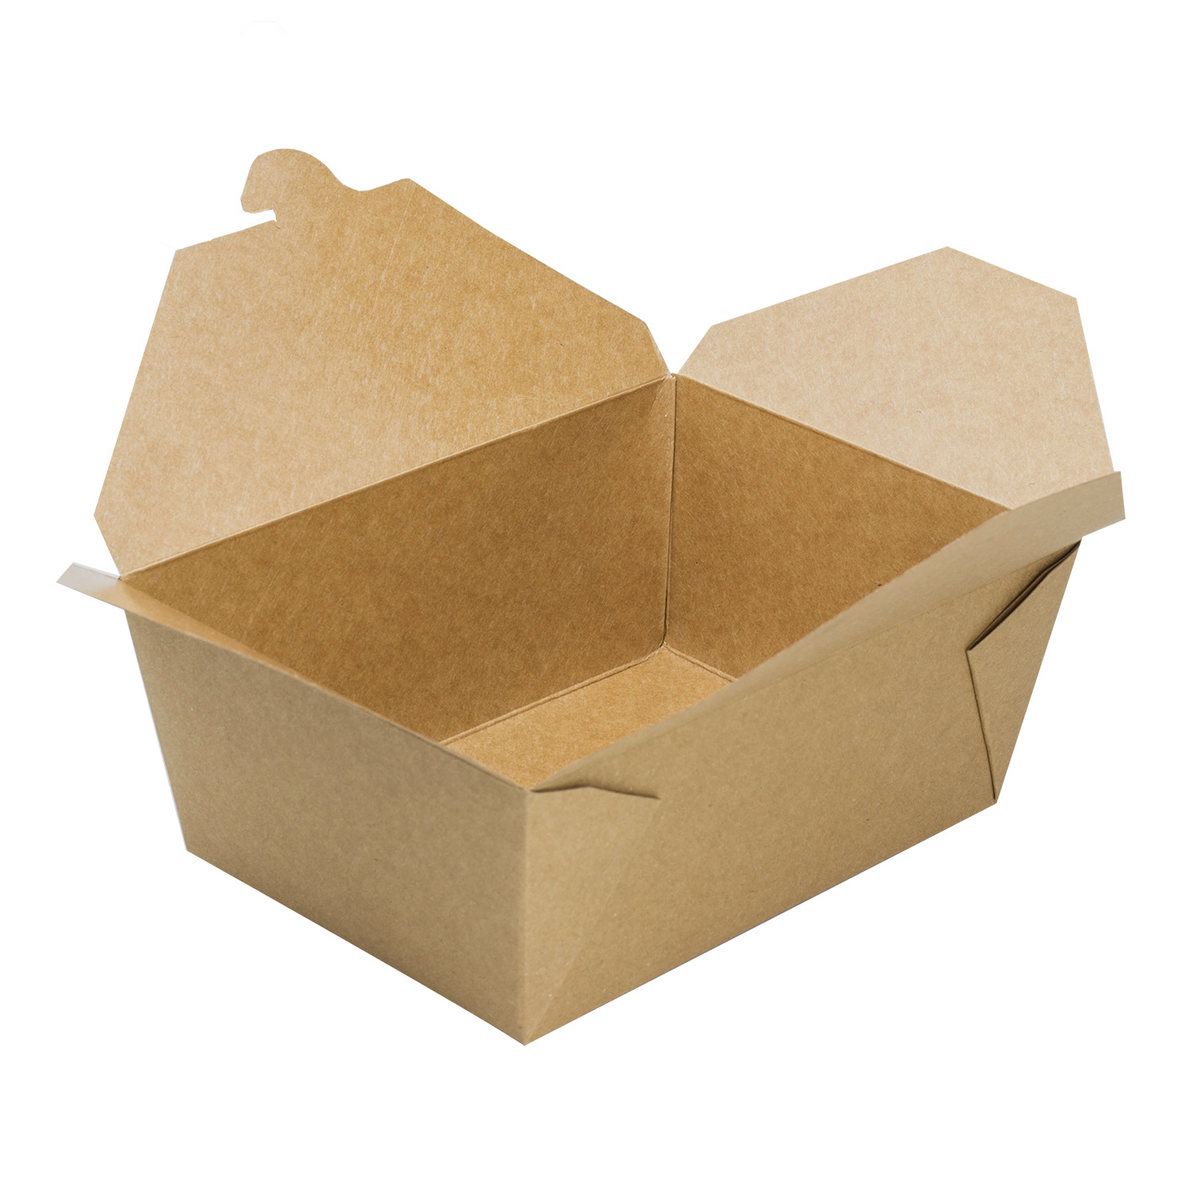 Take Out Food Containers Microwaveable Kraft Brown Take Out Boxes